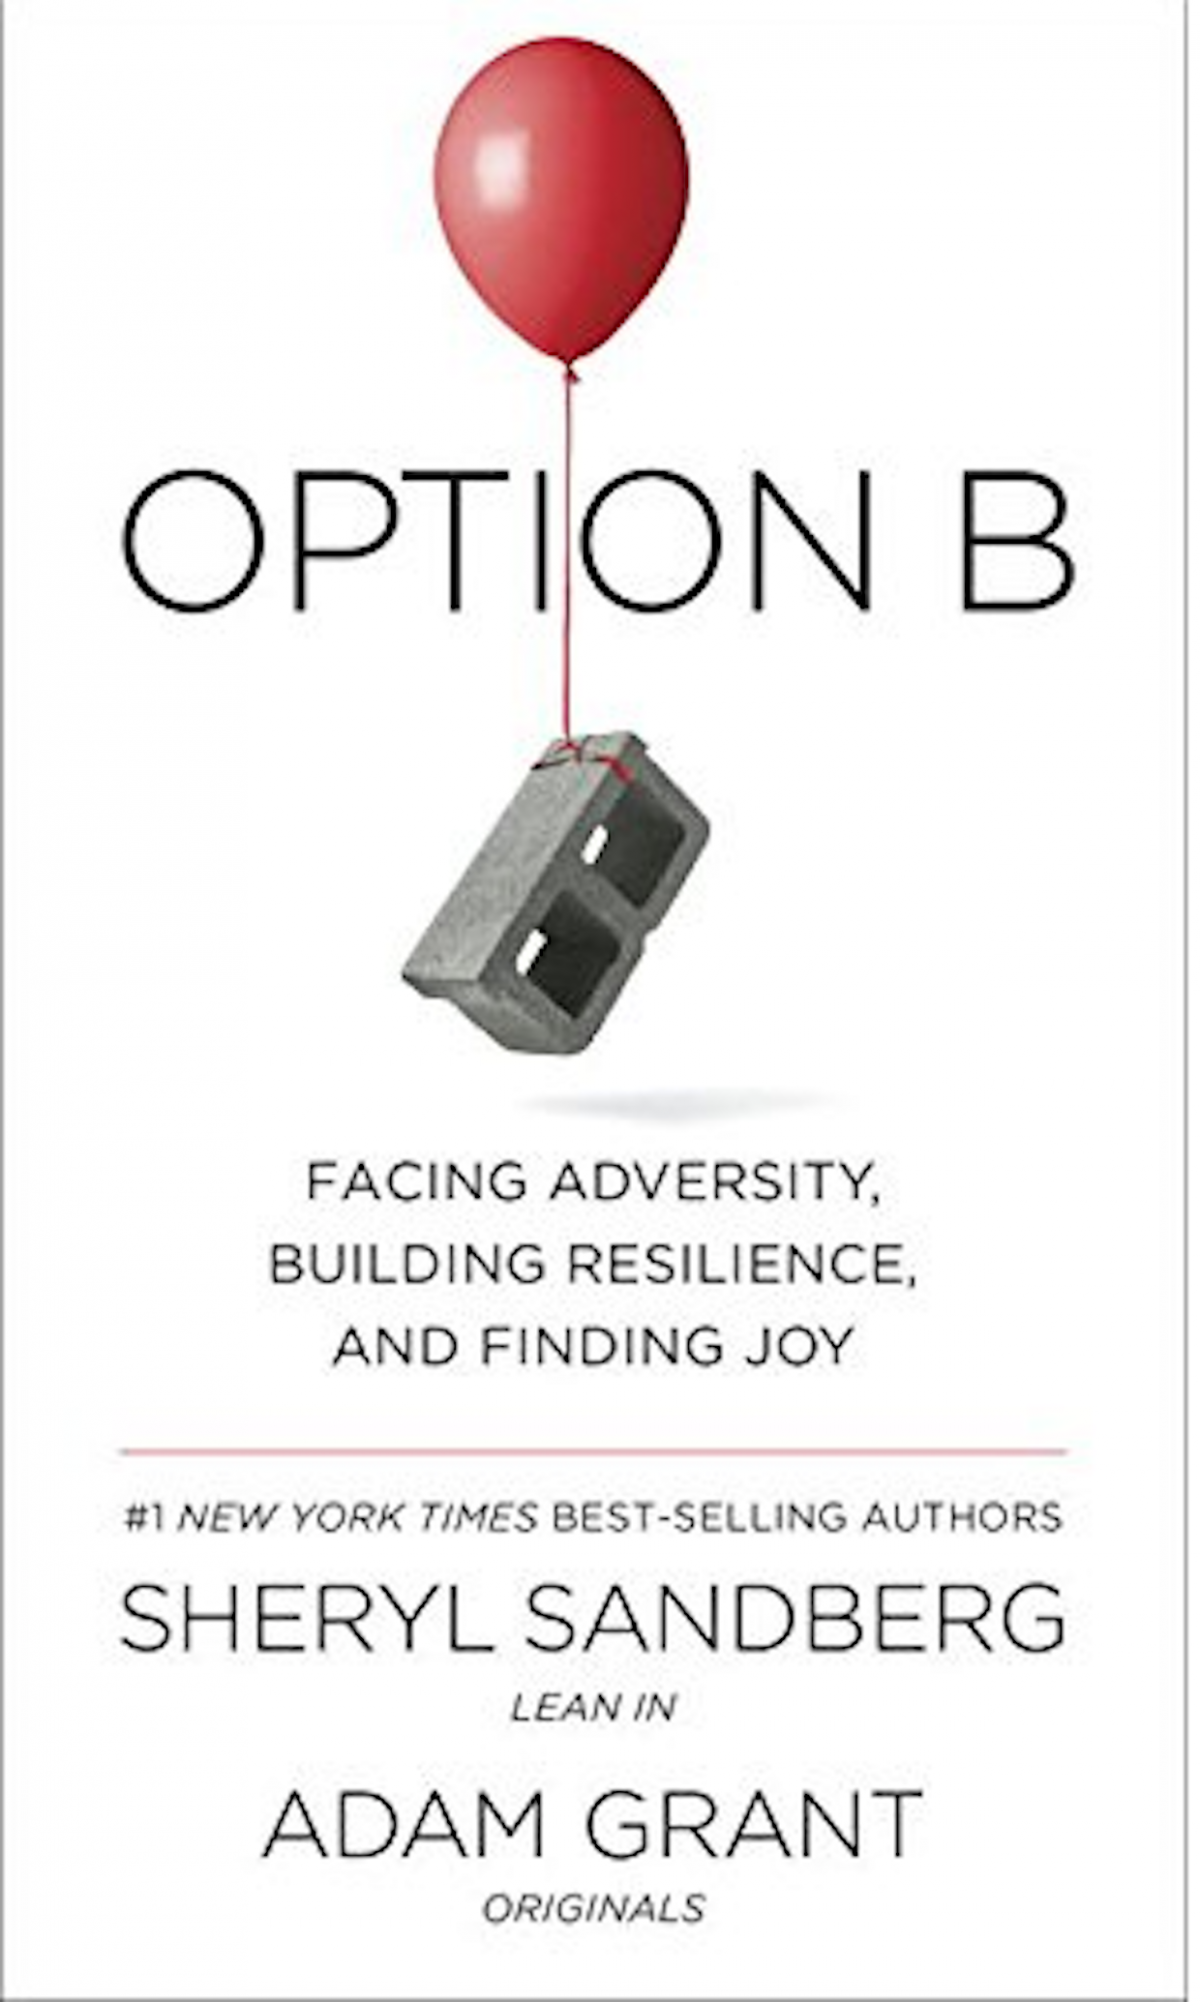 'Option B: Facing Adversity, Building Resilience, and Finding Joy,' by Sheryl Sandberg and Adam Grant